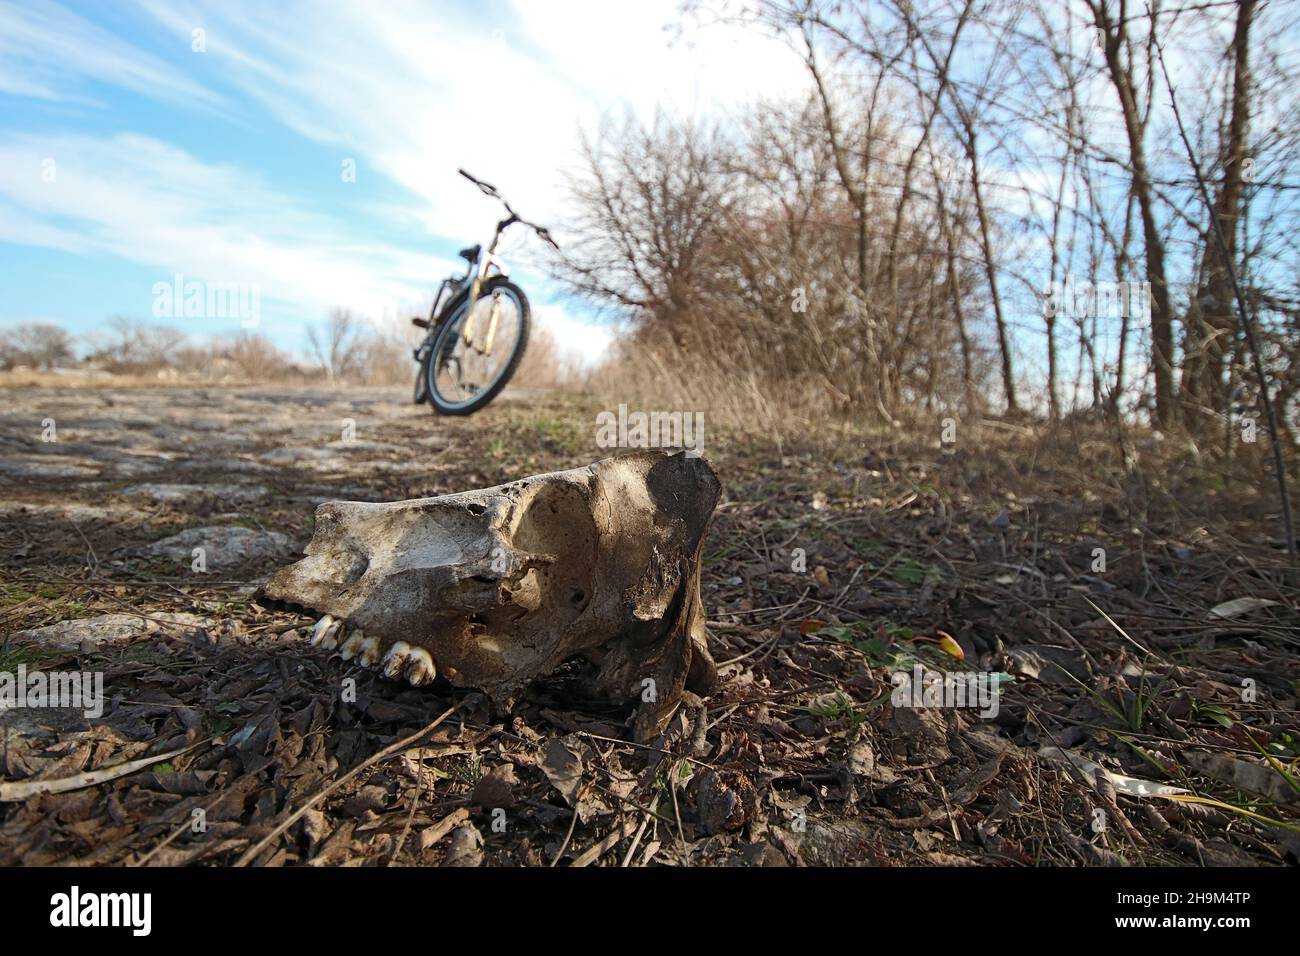 The skull of the animal is lying on the side of the road. A bicycle stands in the distance. Stock Photo